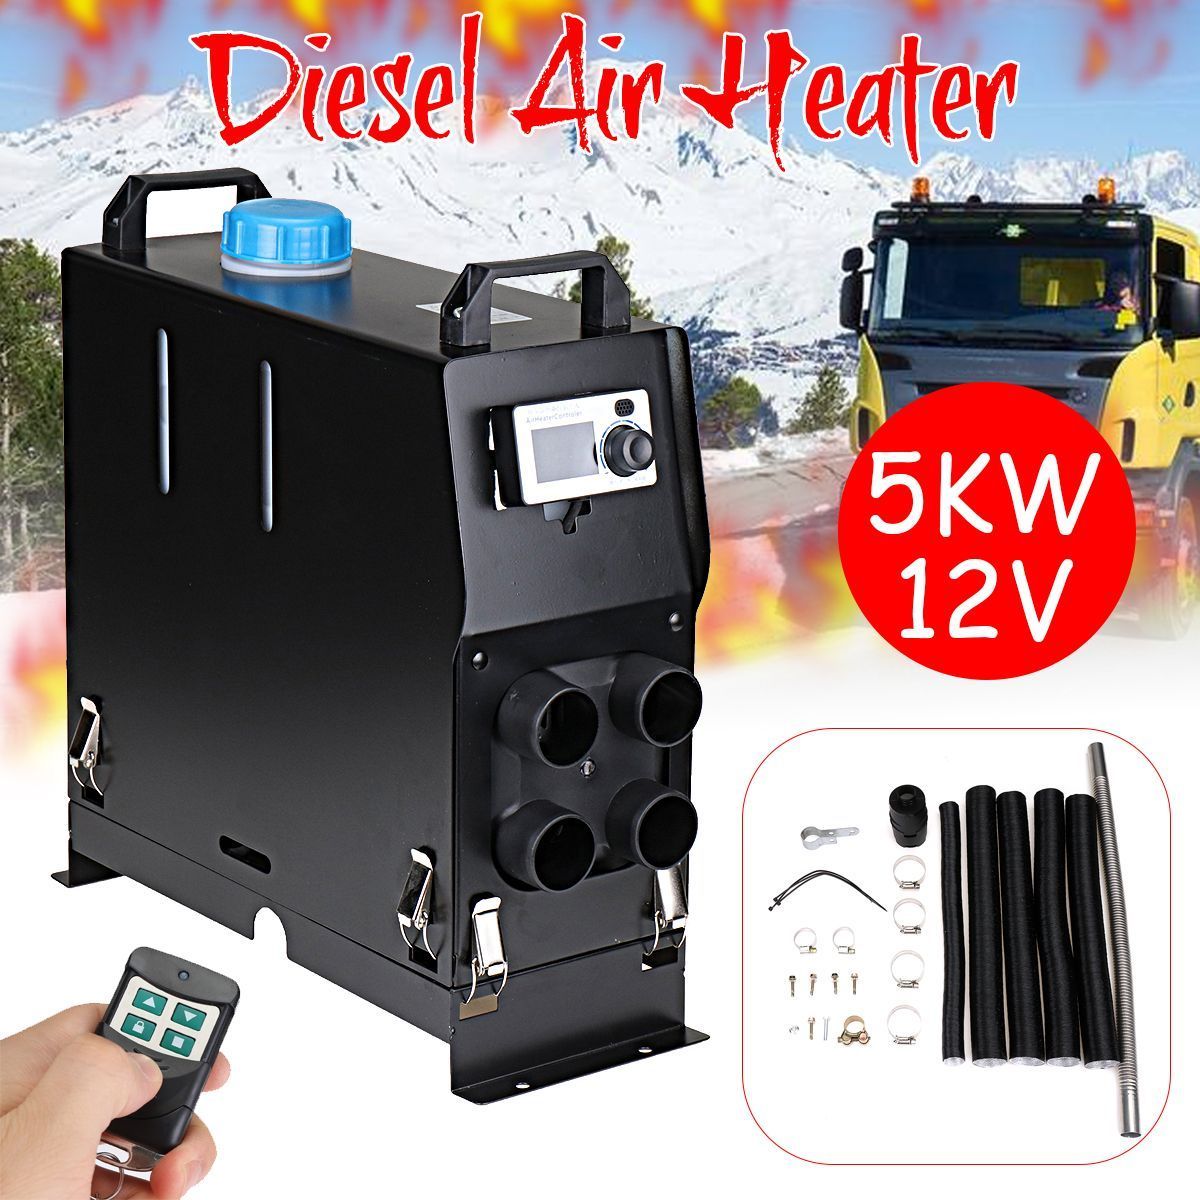 12V-5KW-Air-Diesel-Heater-LCD-4-Holes-Knob-Remote-Control-Parking-Heater-1395157